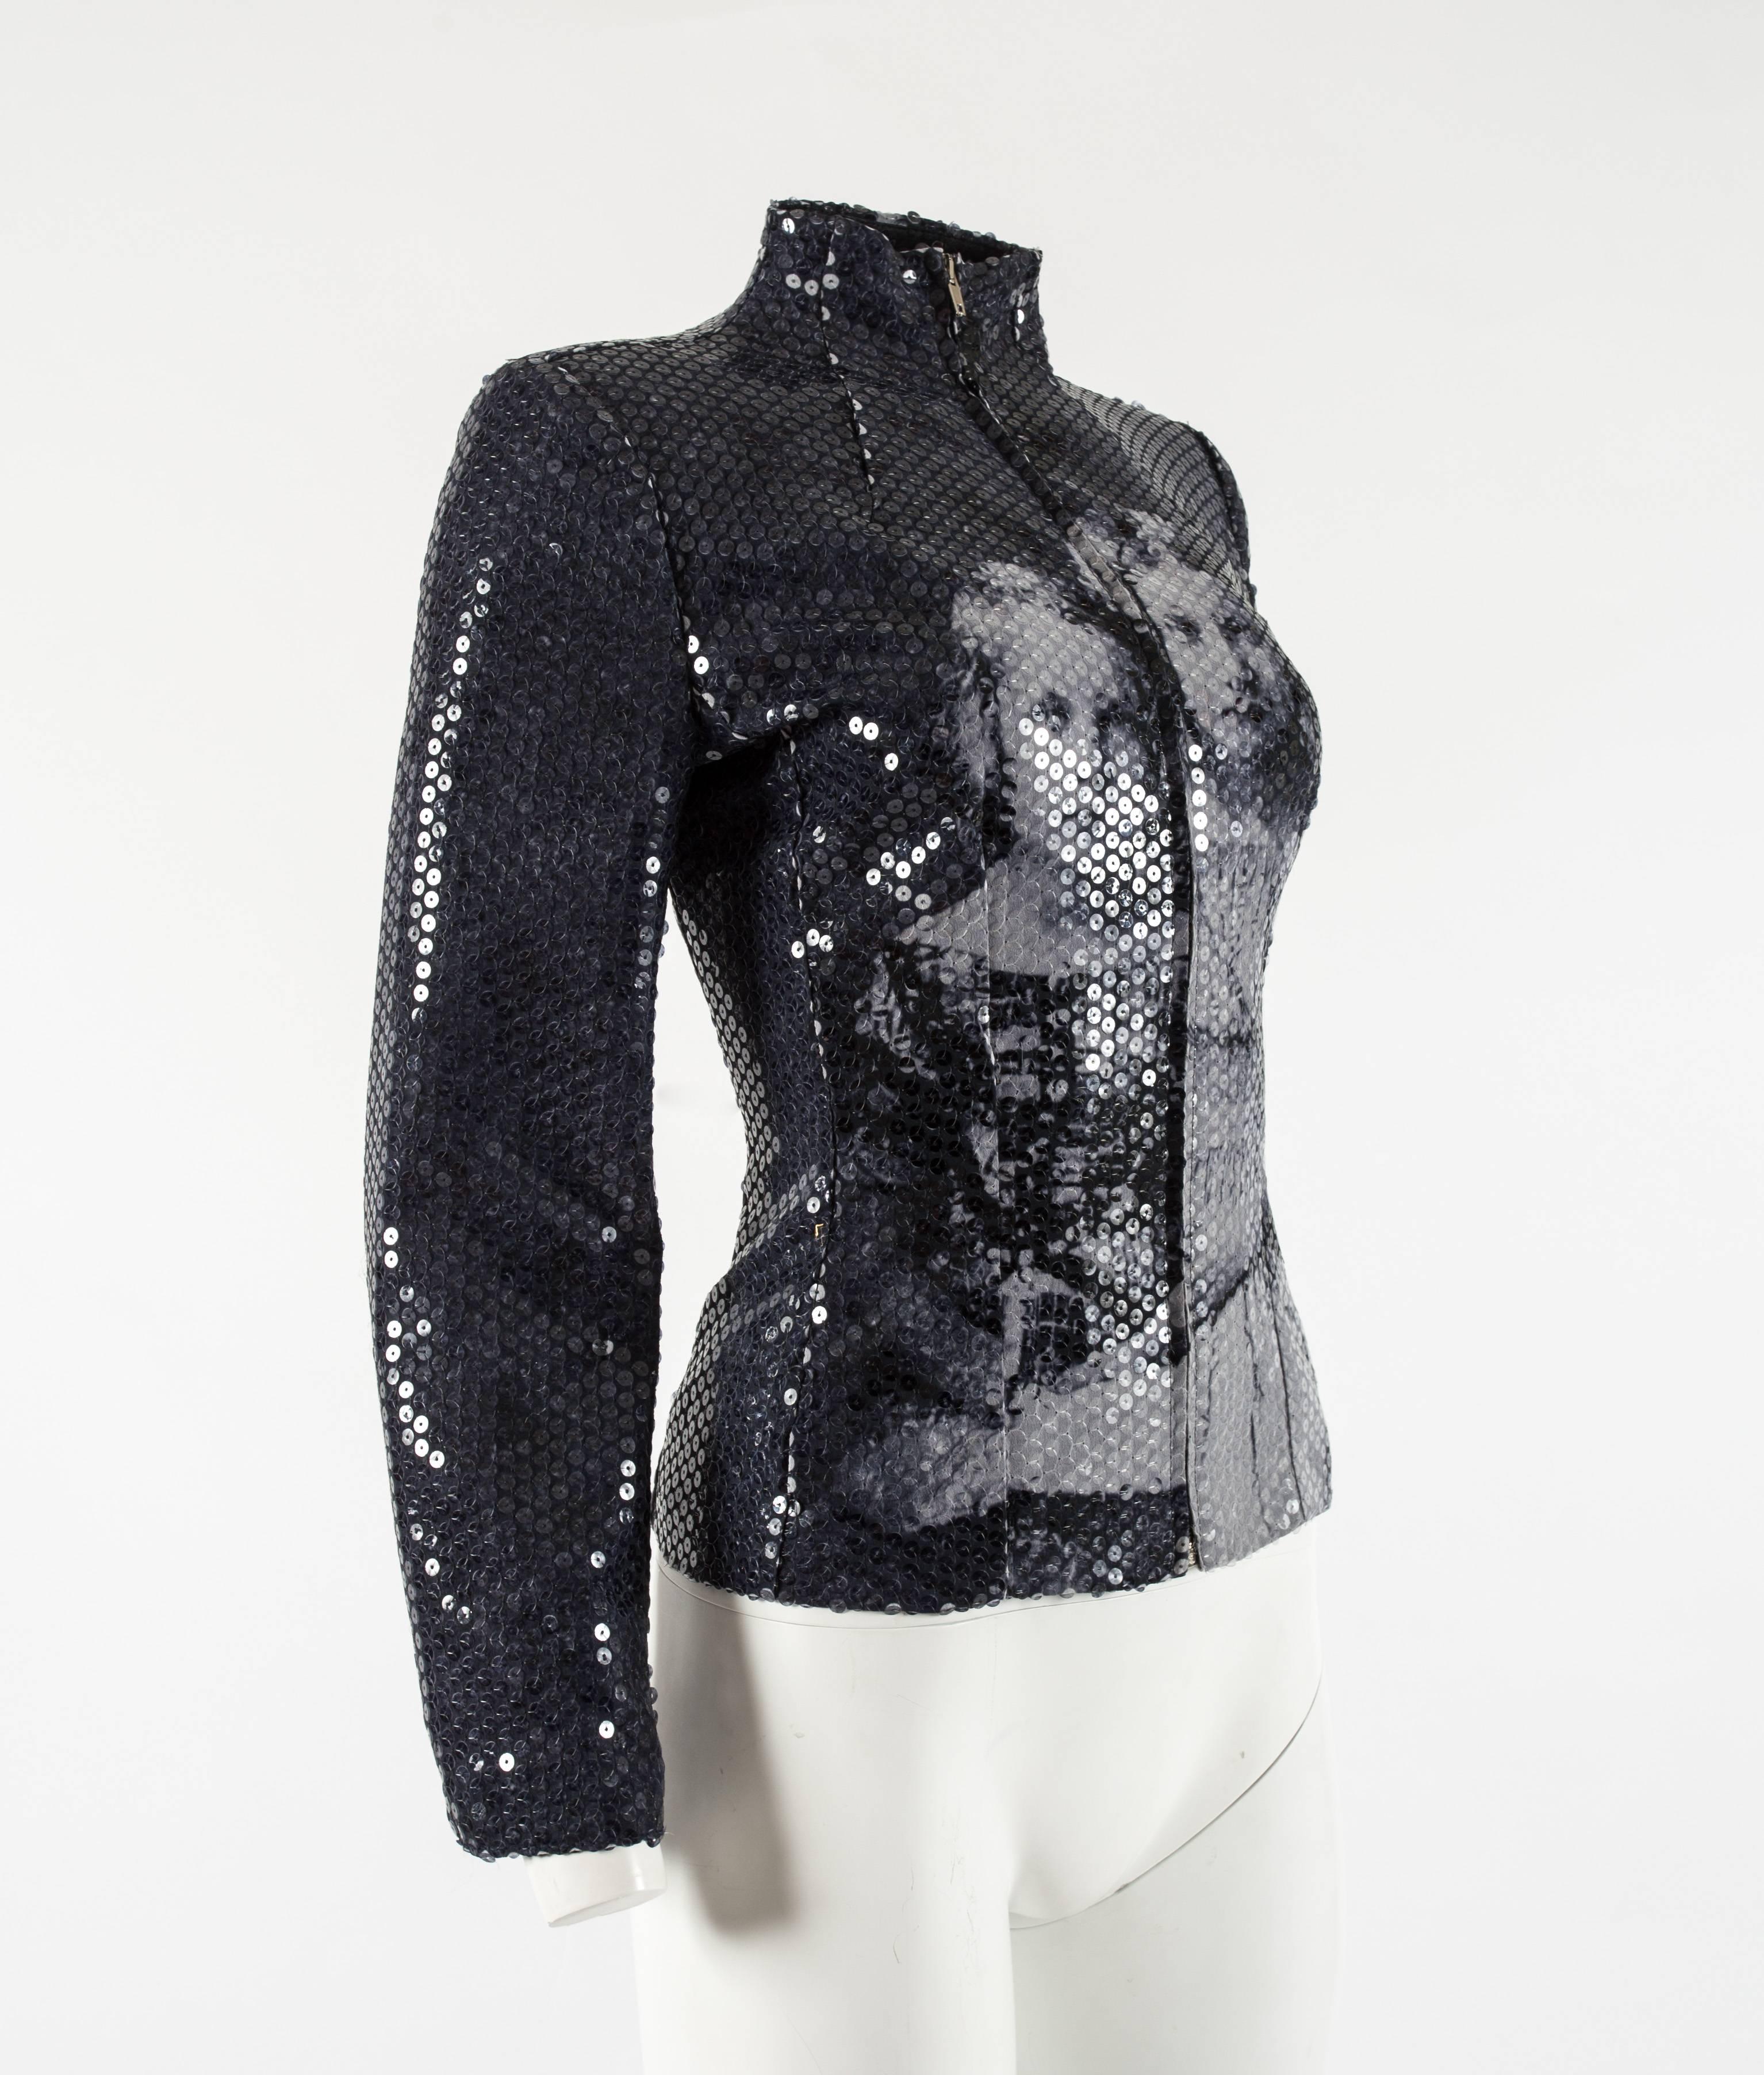 Introducing the Alexander McQueen Autumn-Winter 1998 'Joan' sequin jacket, a truly extraordinary piece that reflects the late designer's profound artistic vision and storytelling.

This jacket is an homage to history, fully sequinned in a repetitive